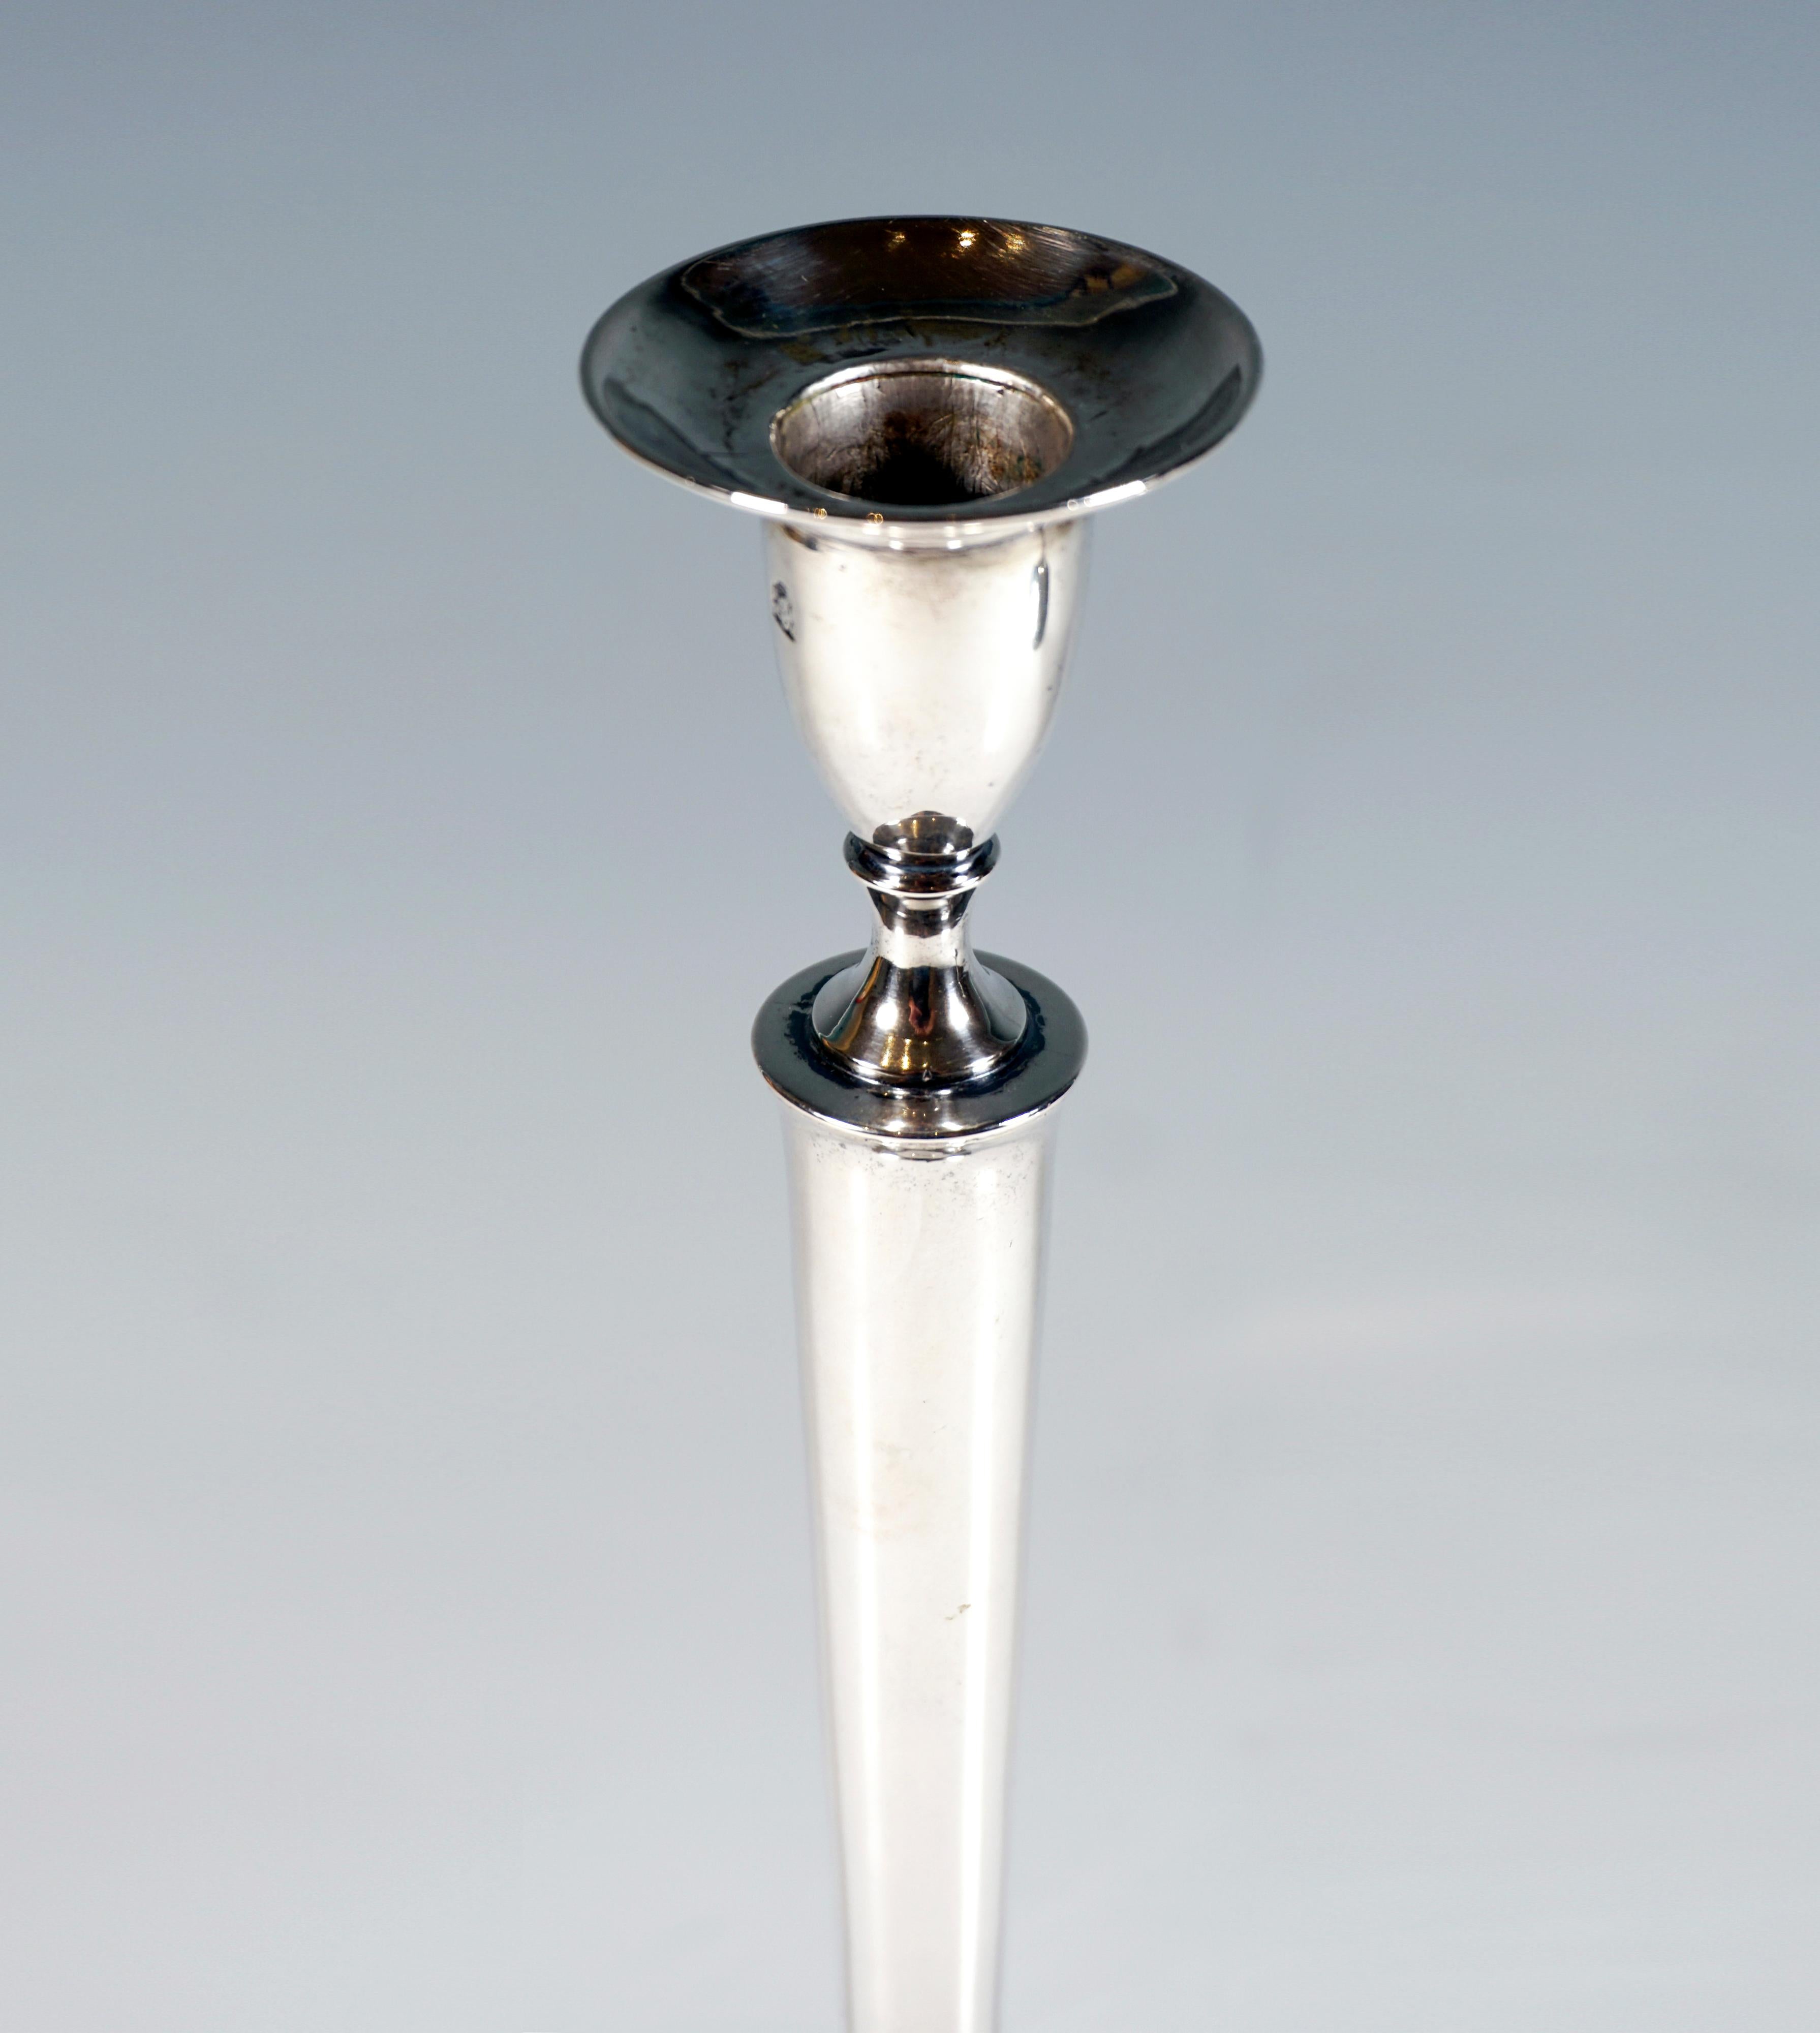 Hand-Crafted Pair Of Antique Empire Silver Candle Holders, Austria-Hungary, Dated 1821 For Sale